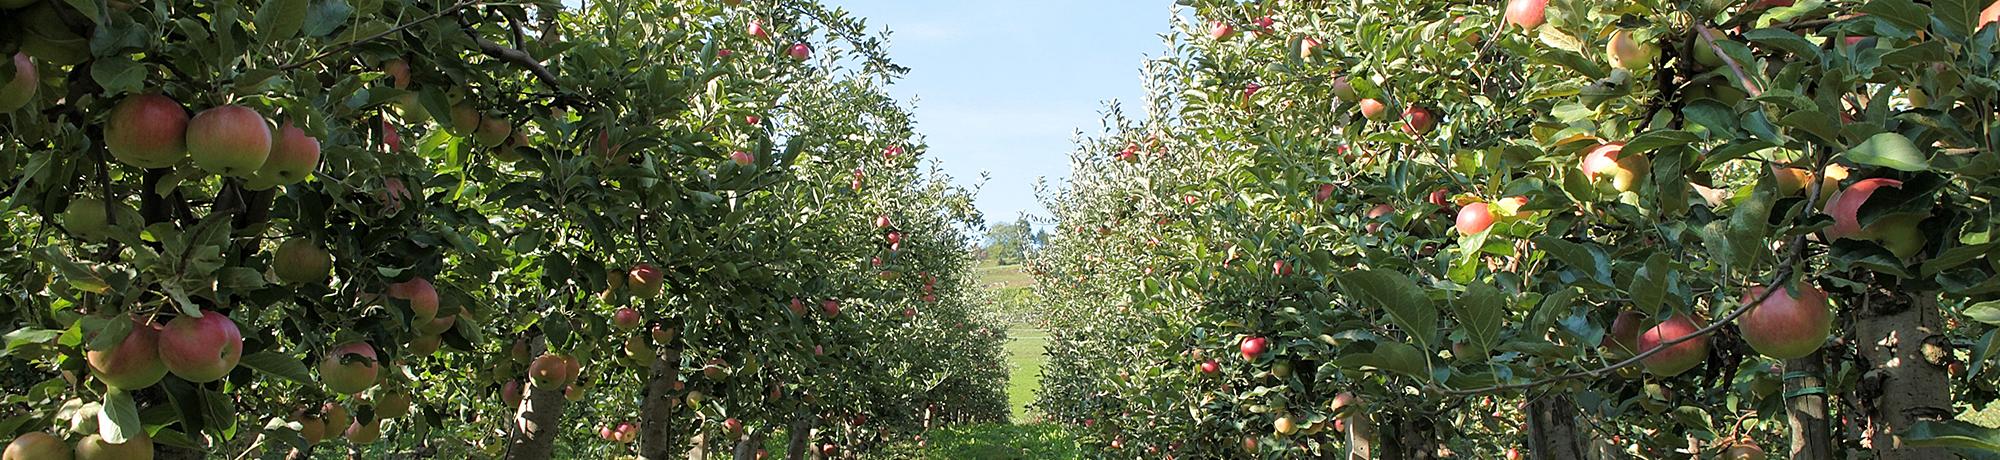 orchard of fruit trees